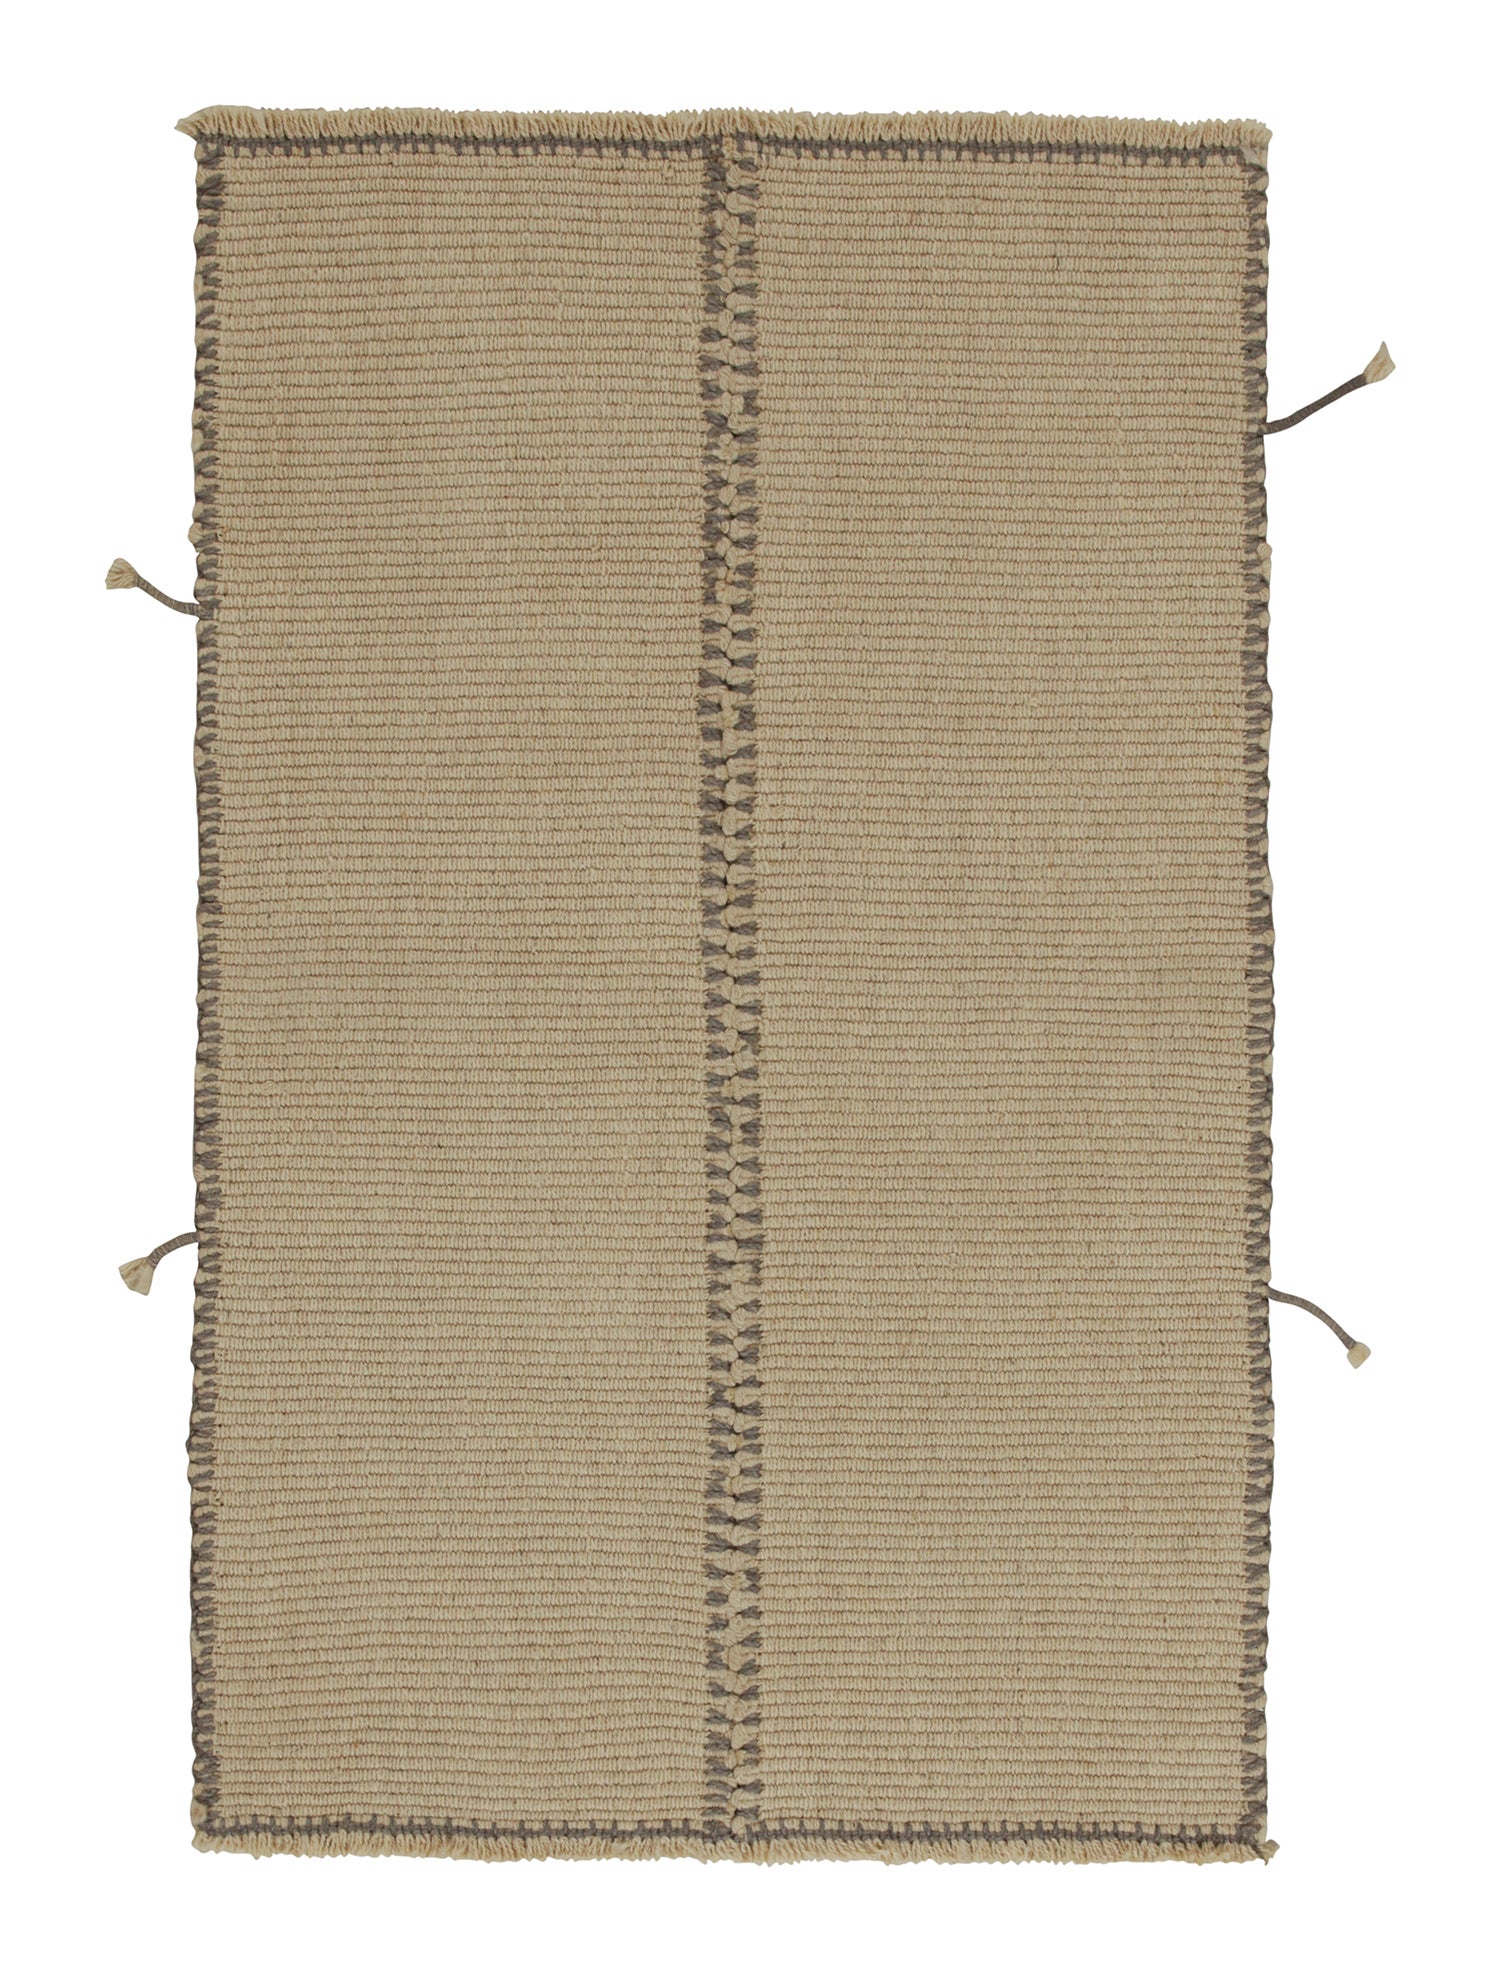 Rug & Kilim’s Contemporary Kilim in Beige-Brown with Grey Accents